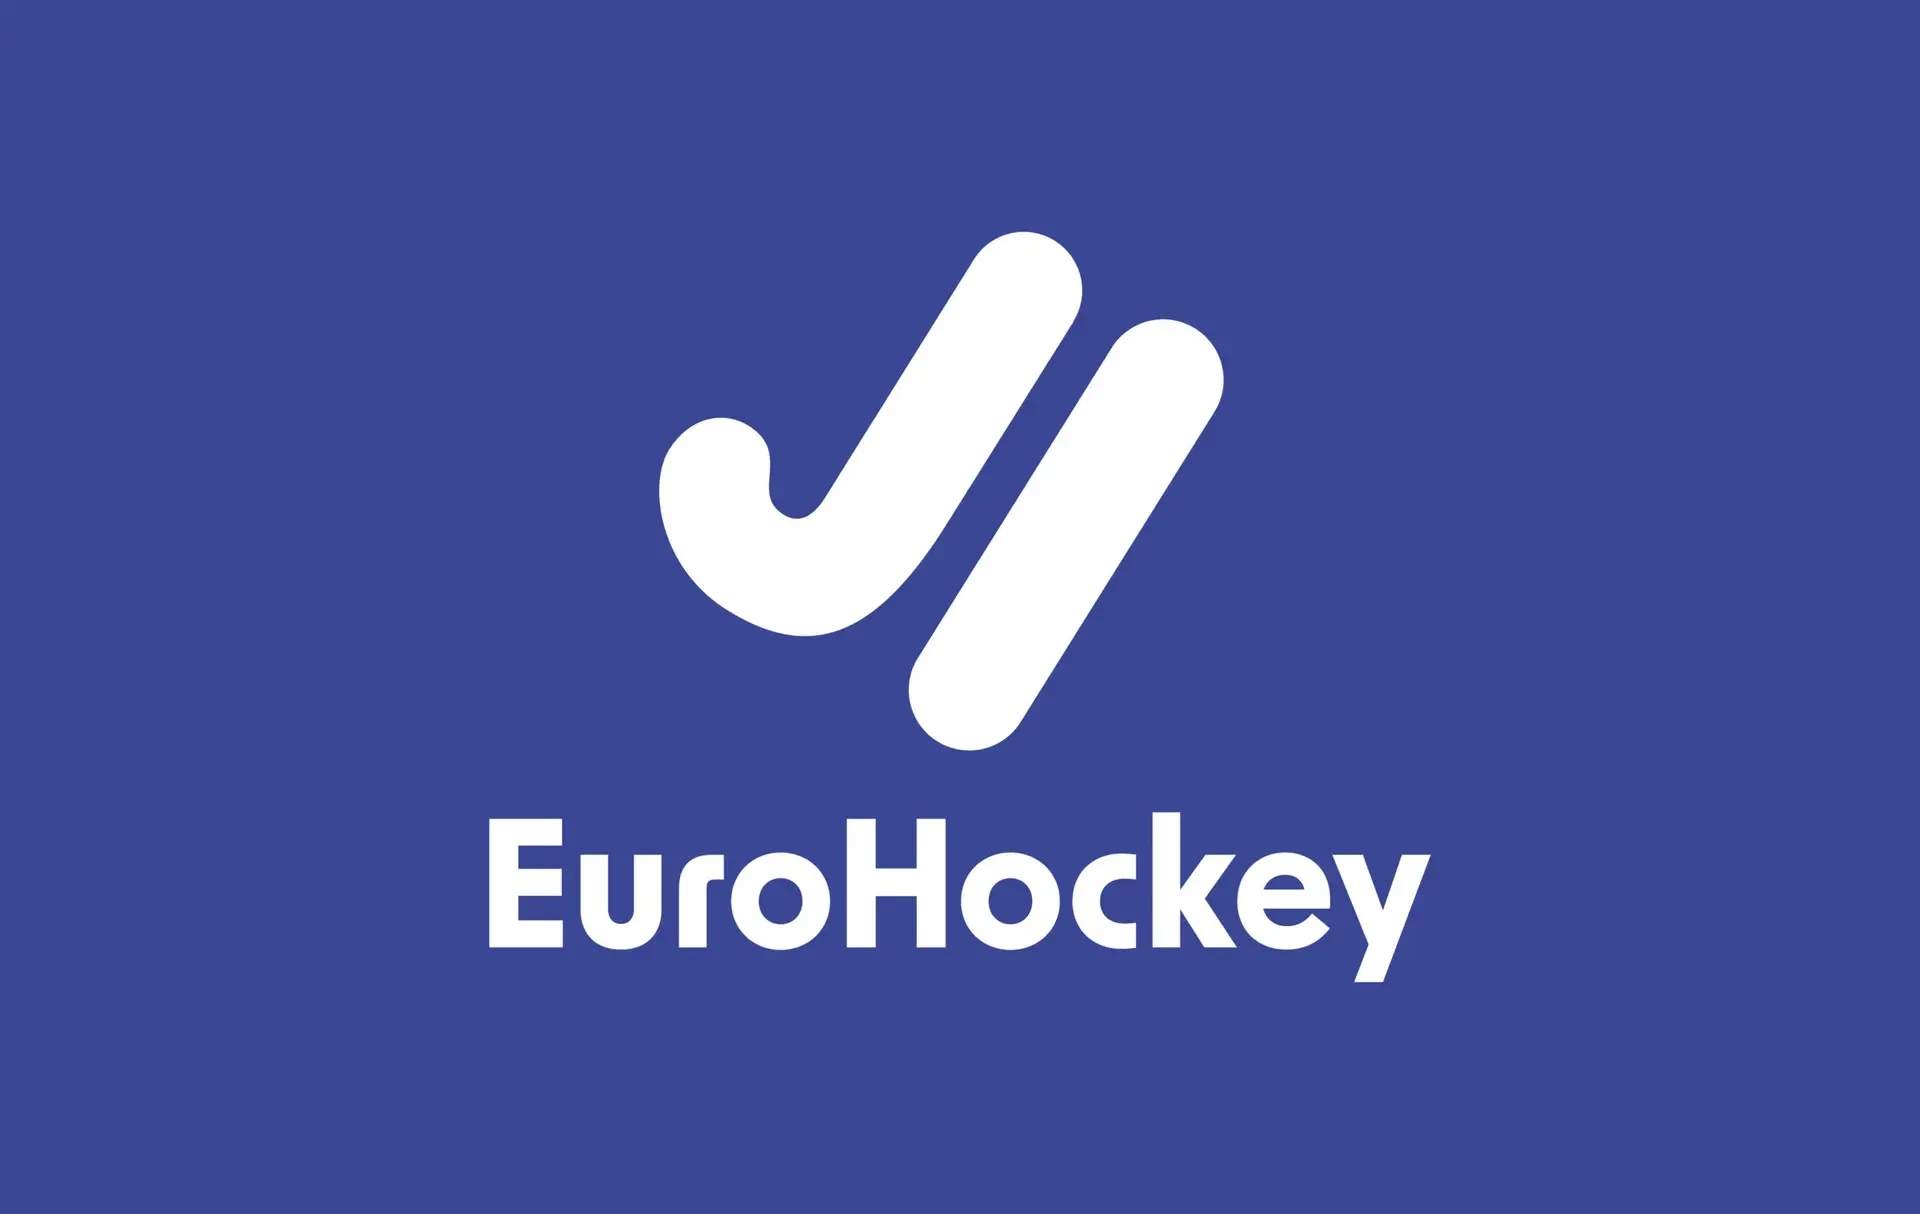 A rebrand to EuroHockey including a logo which puts 